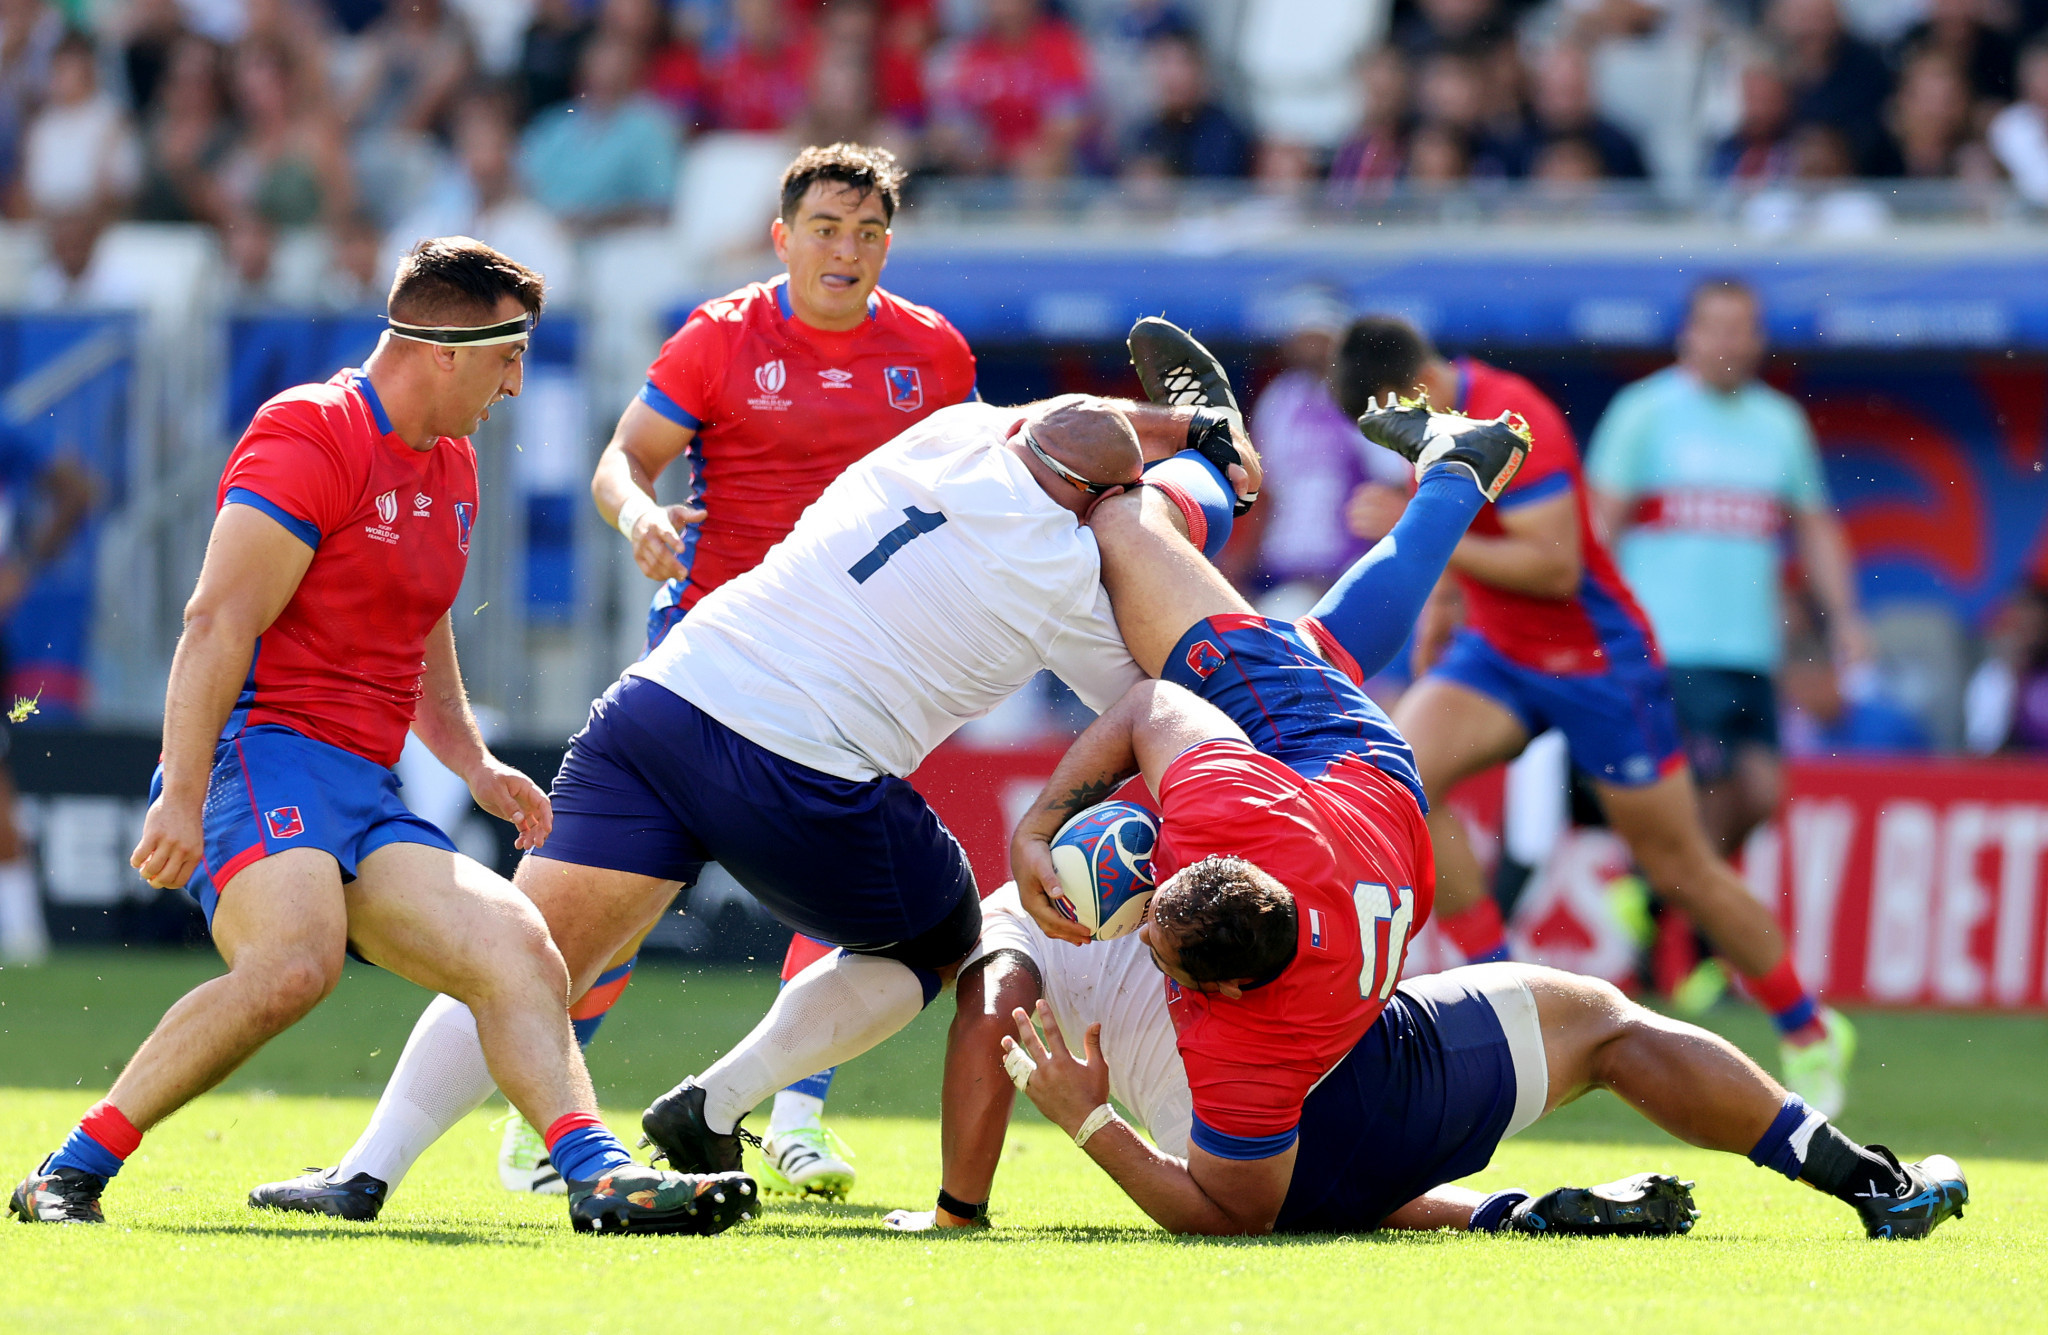 Matias Dittus, being tackled, helped Chile take the lead ©Getty Images